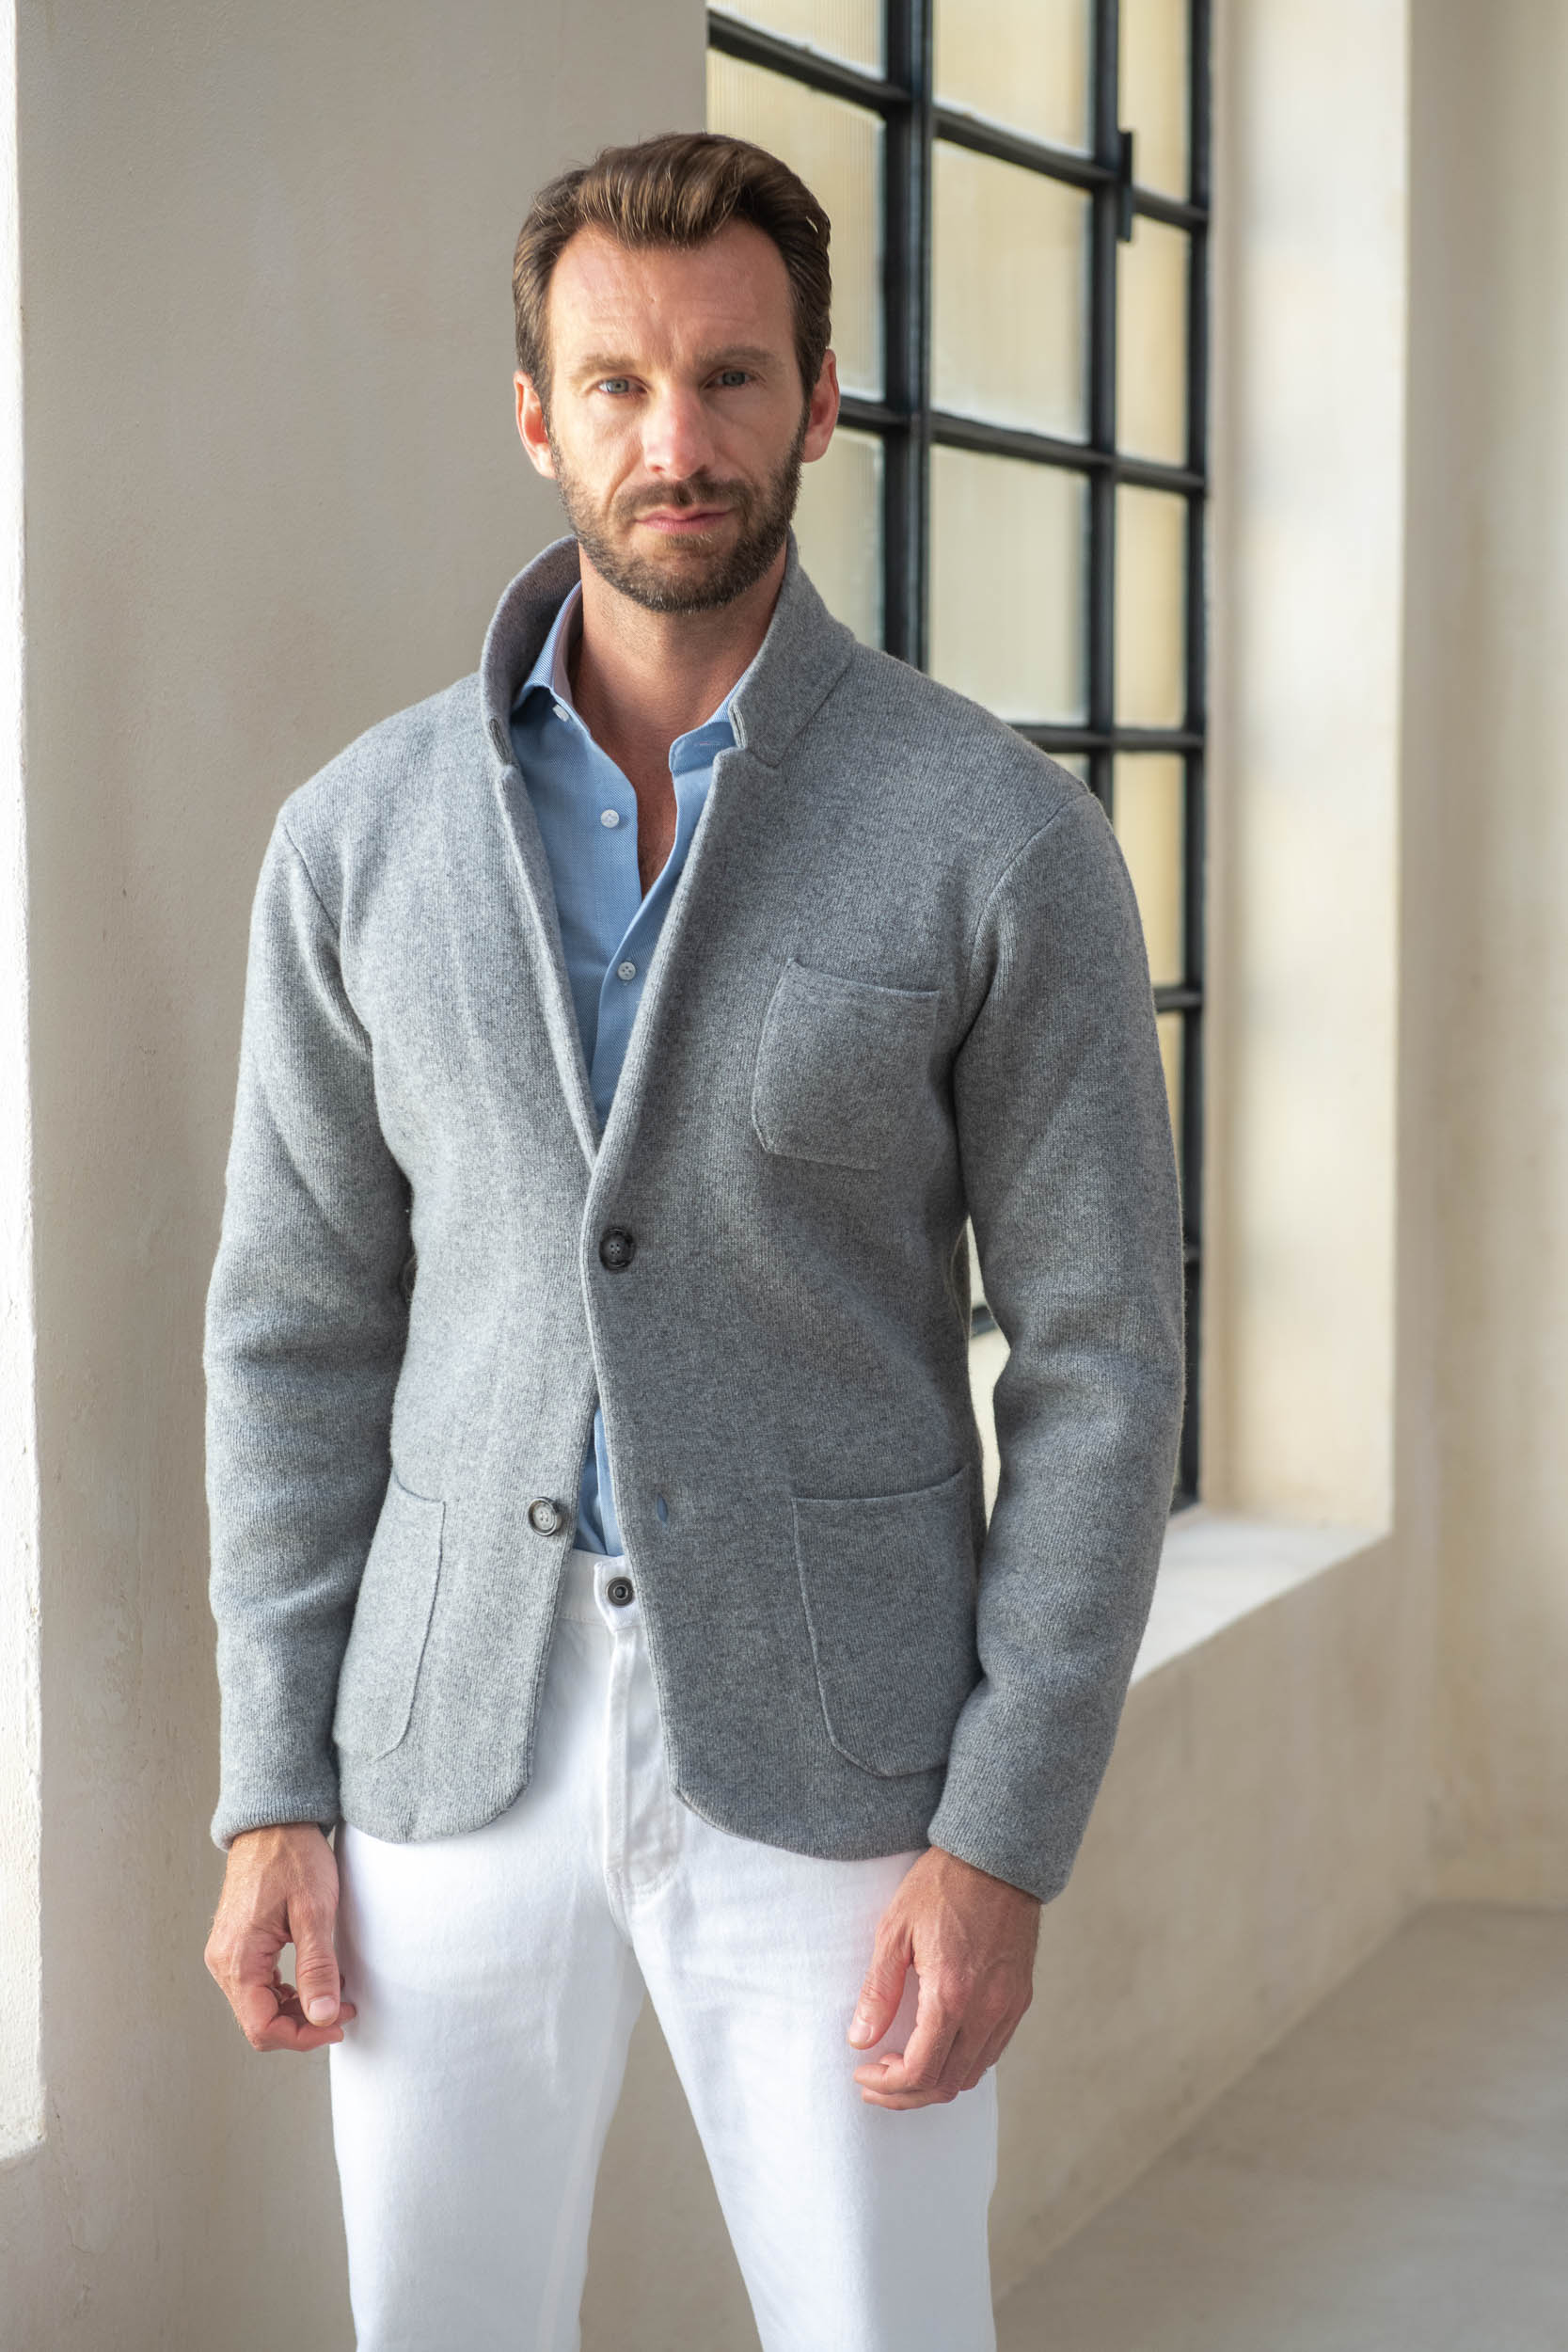 GREY KNITTED JACKET – WOOL AND CASHMERE | Made in Italy